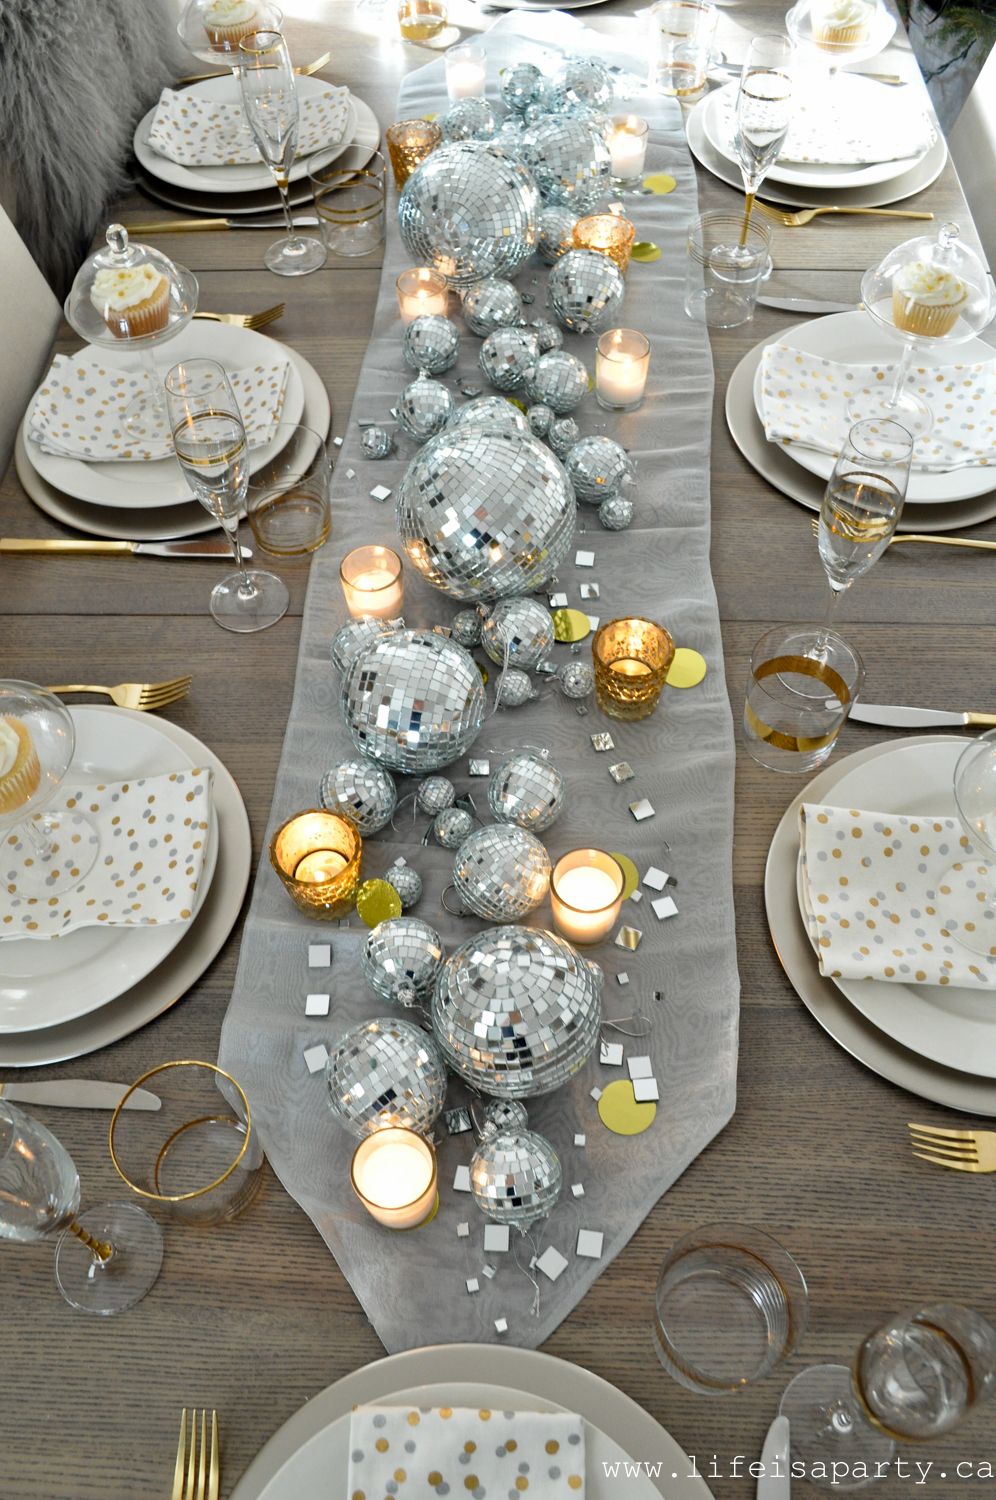 22 New Year's Table Decorations to Add Festive Flair